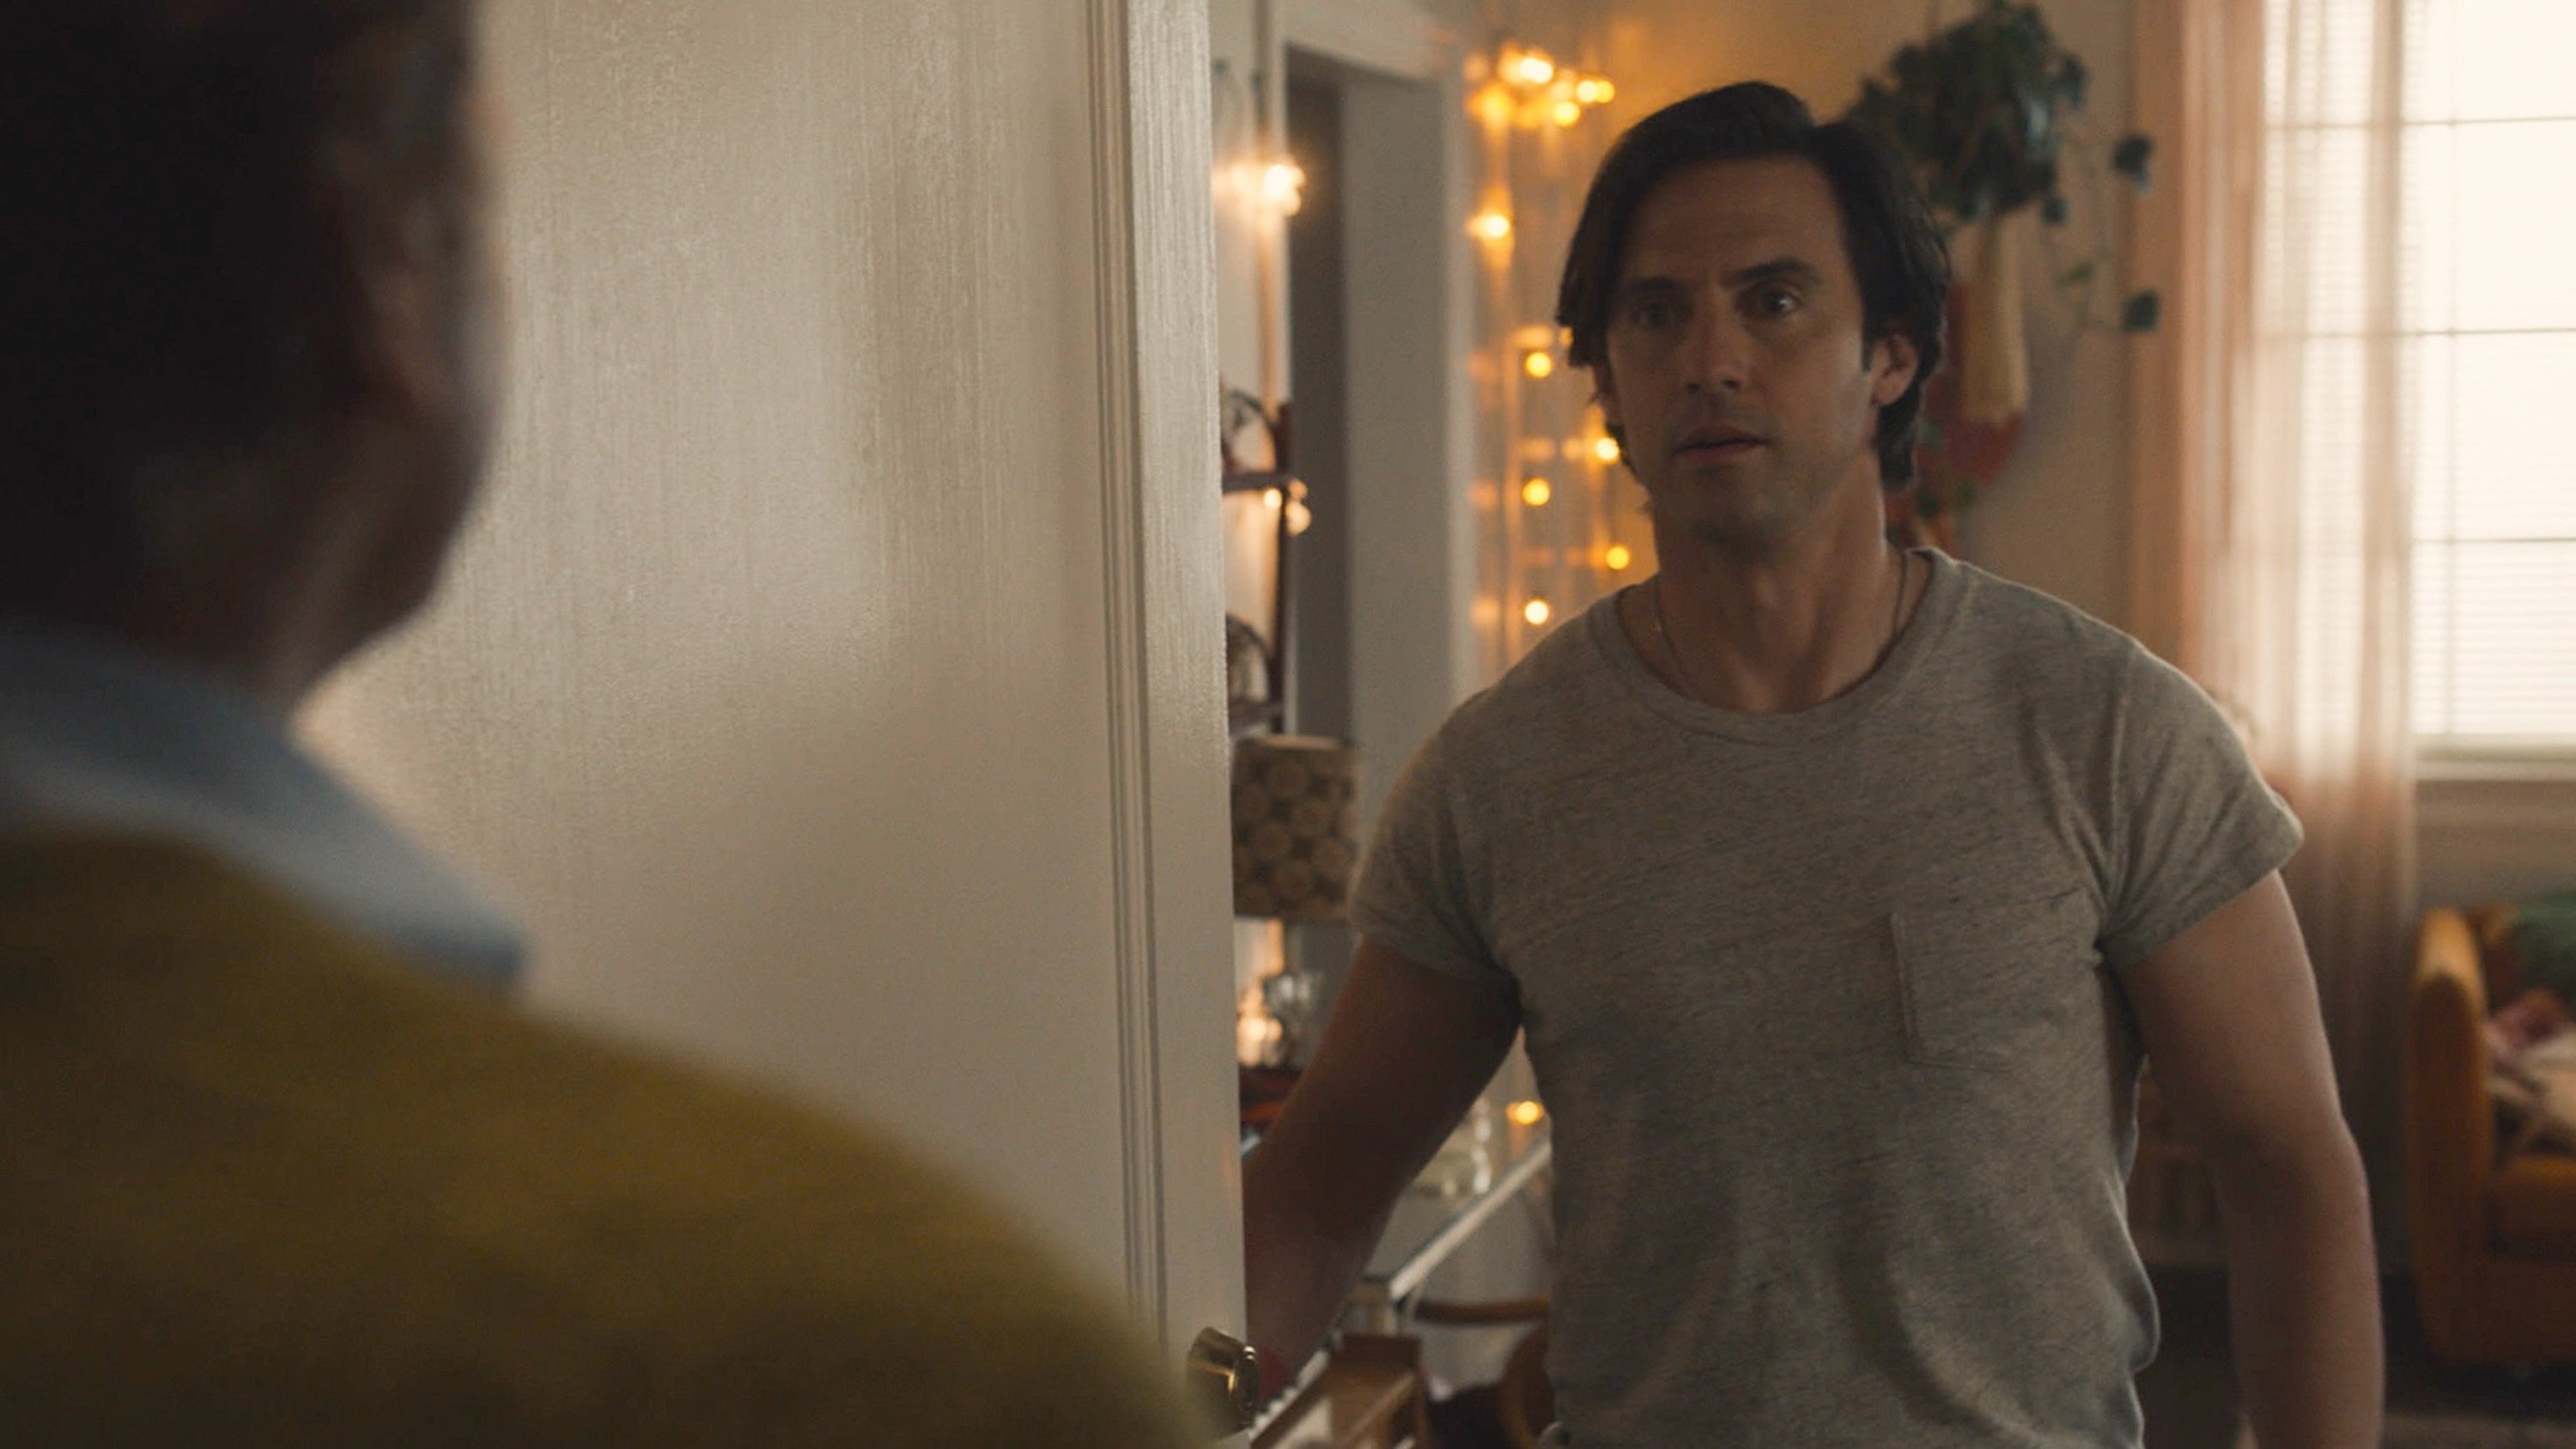 This Is Us Season 5 Episode 12 with Milo Ventimiglia as Jack and Jon Huertas as Miguel